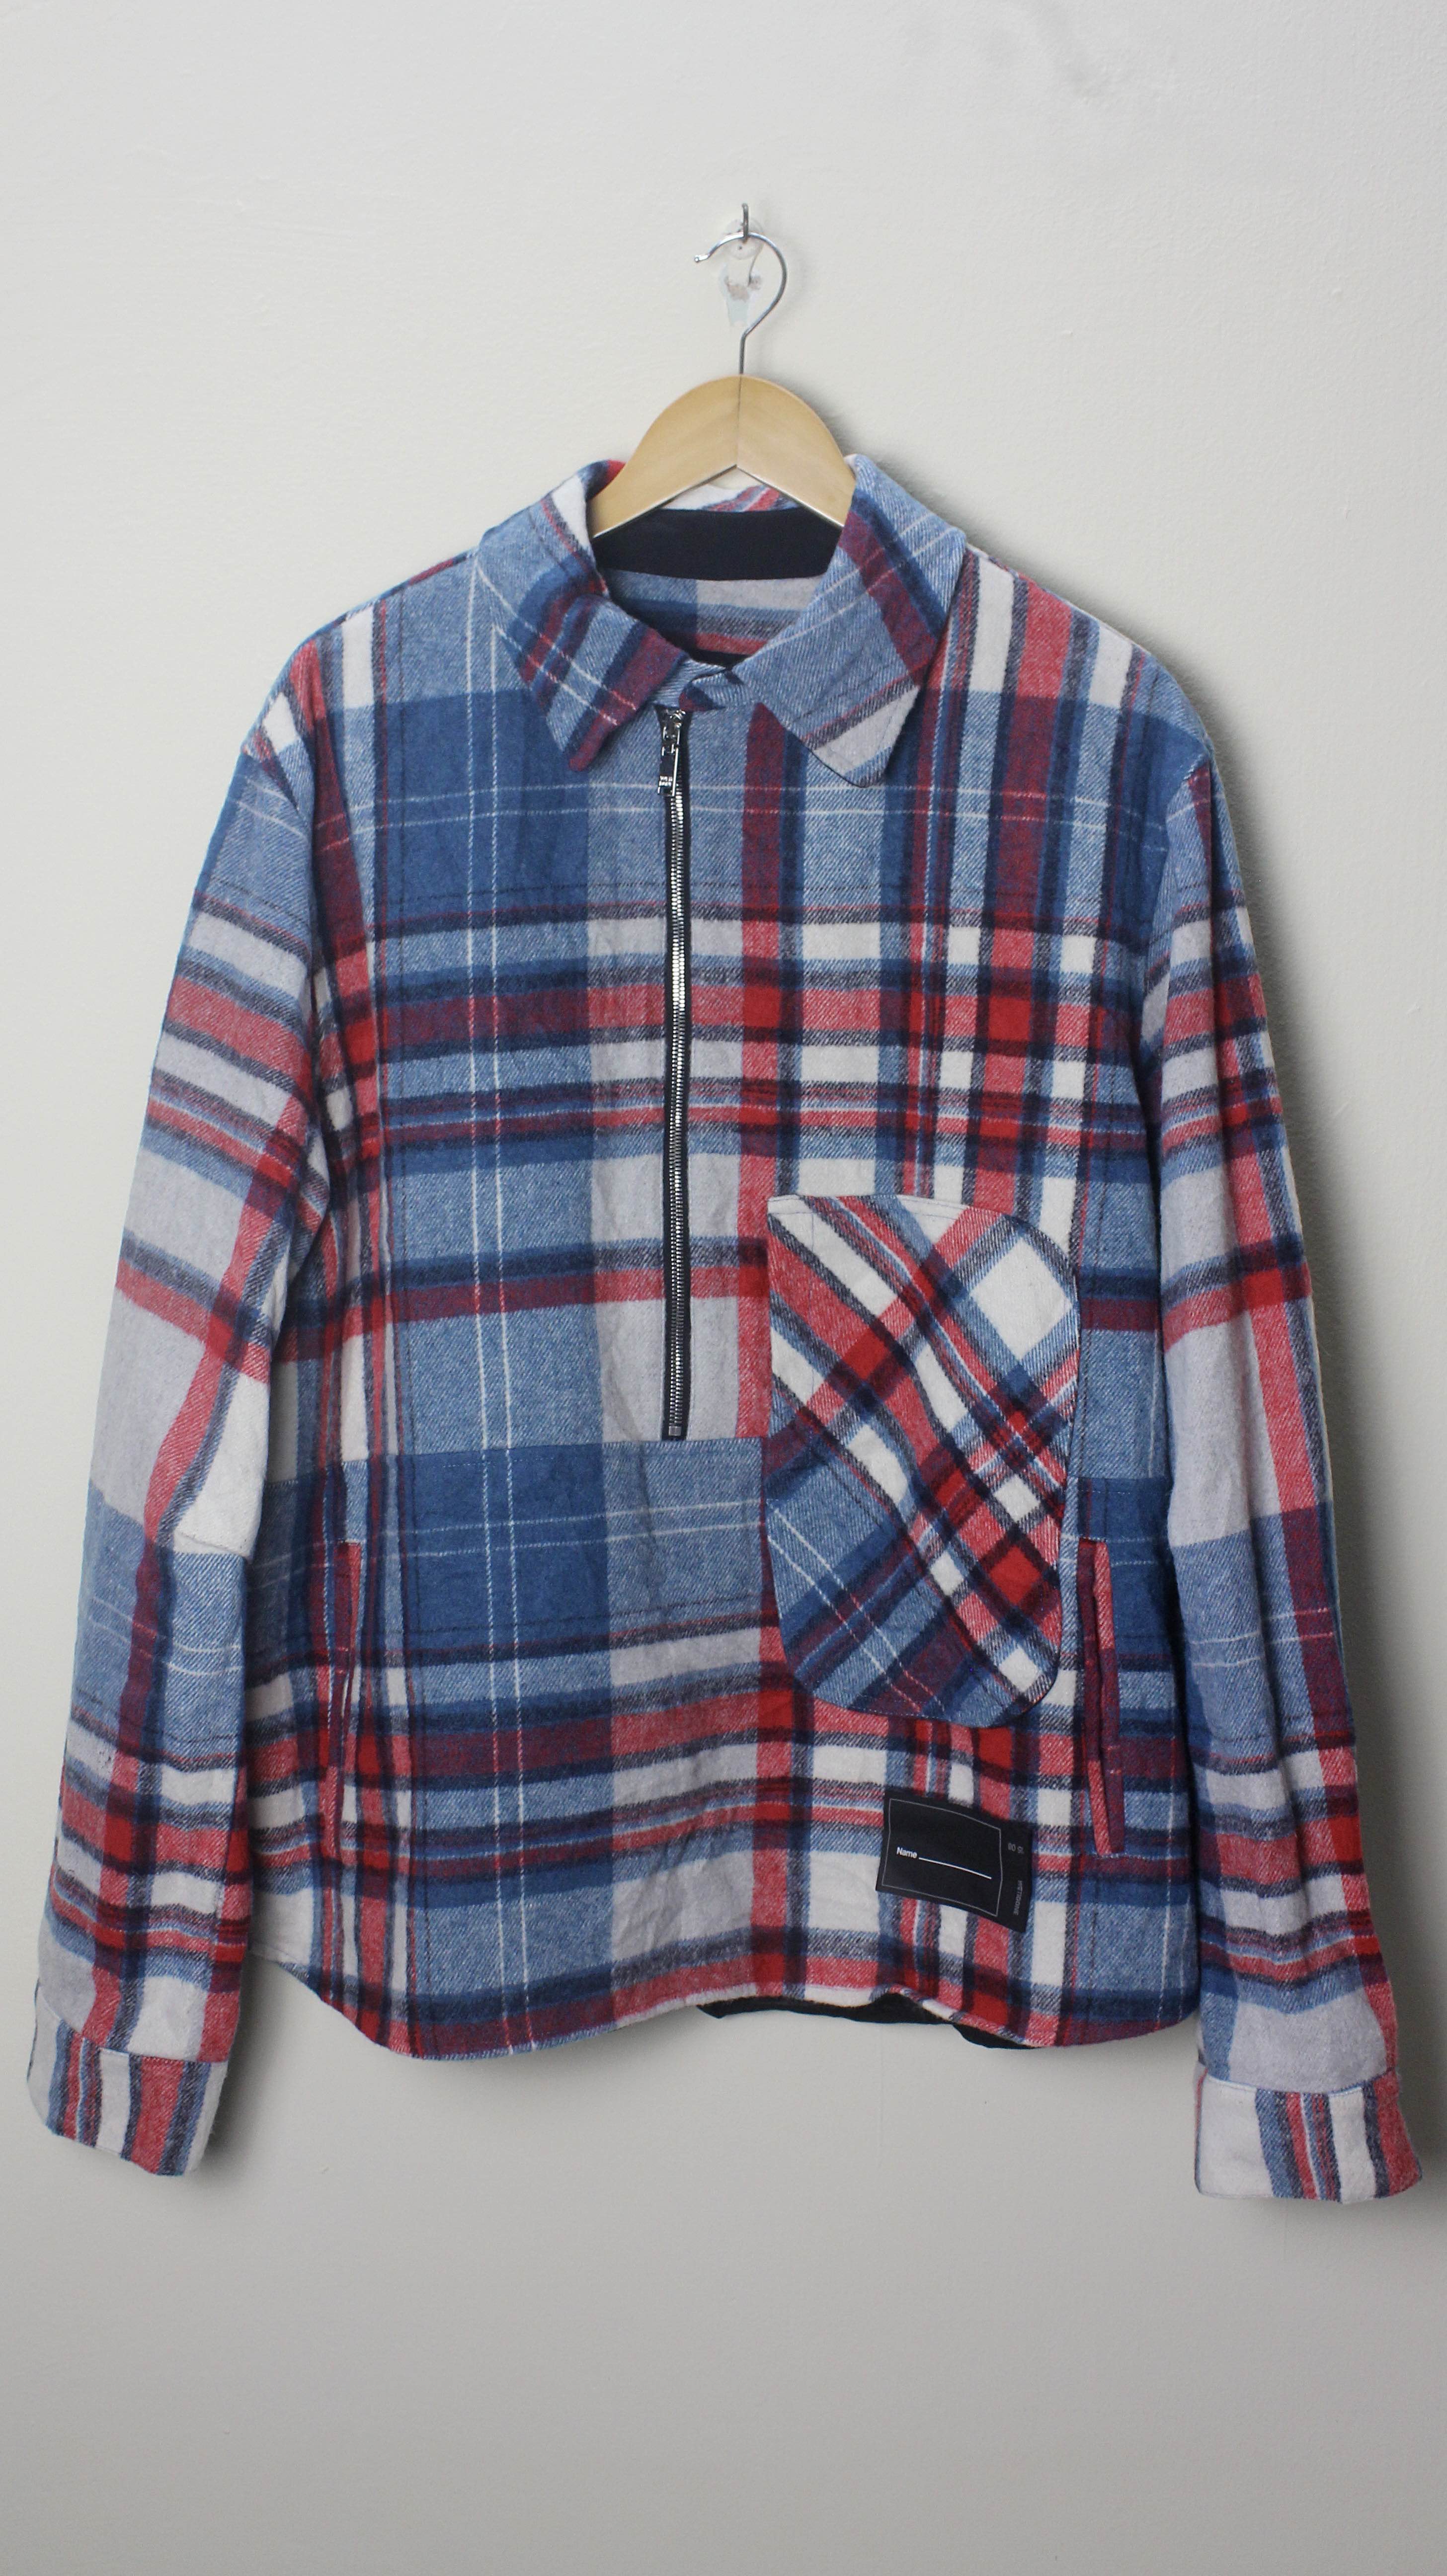 We11done - Checked Wool Shirt Multicolor Plaid Jacket Justin Bieber - 2